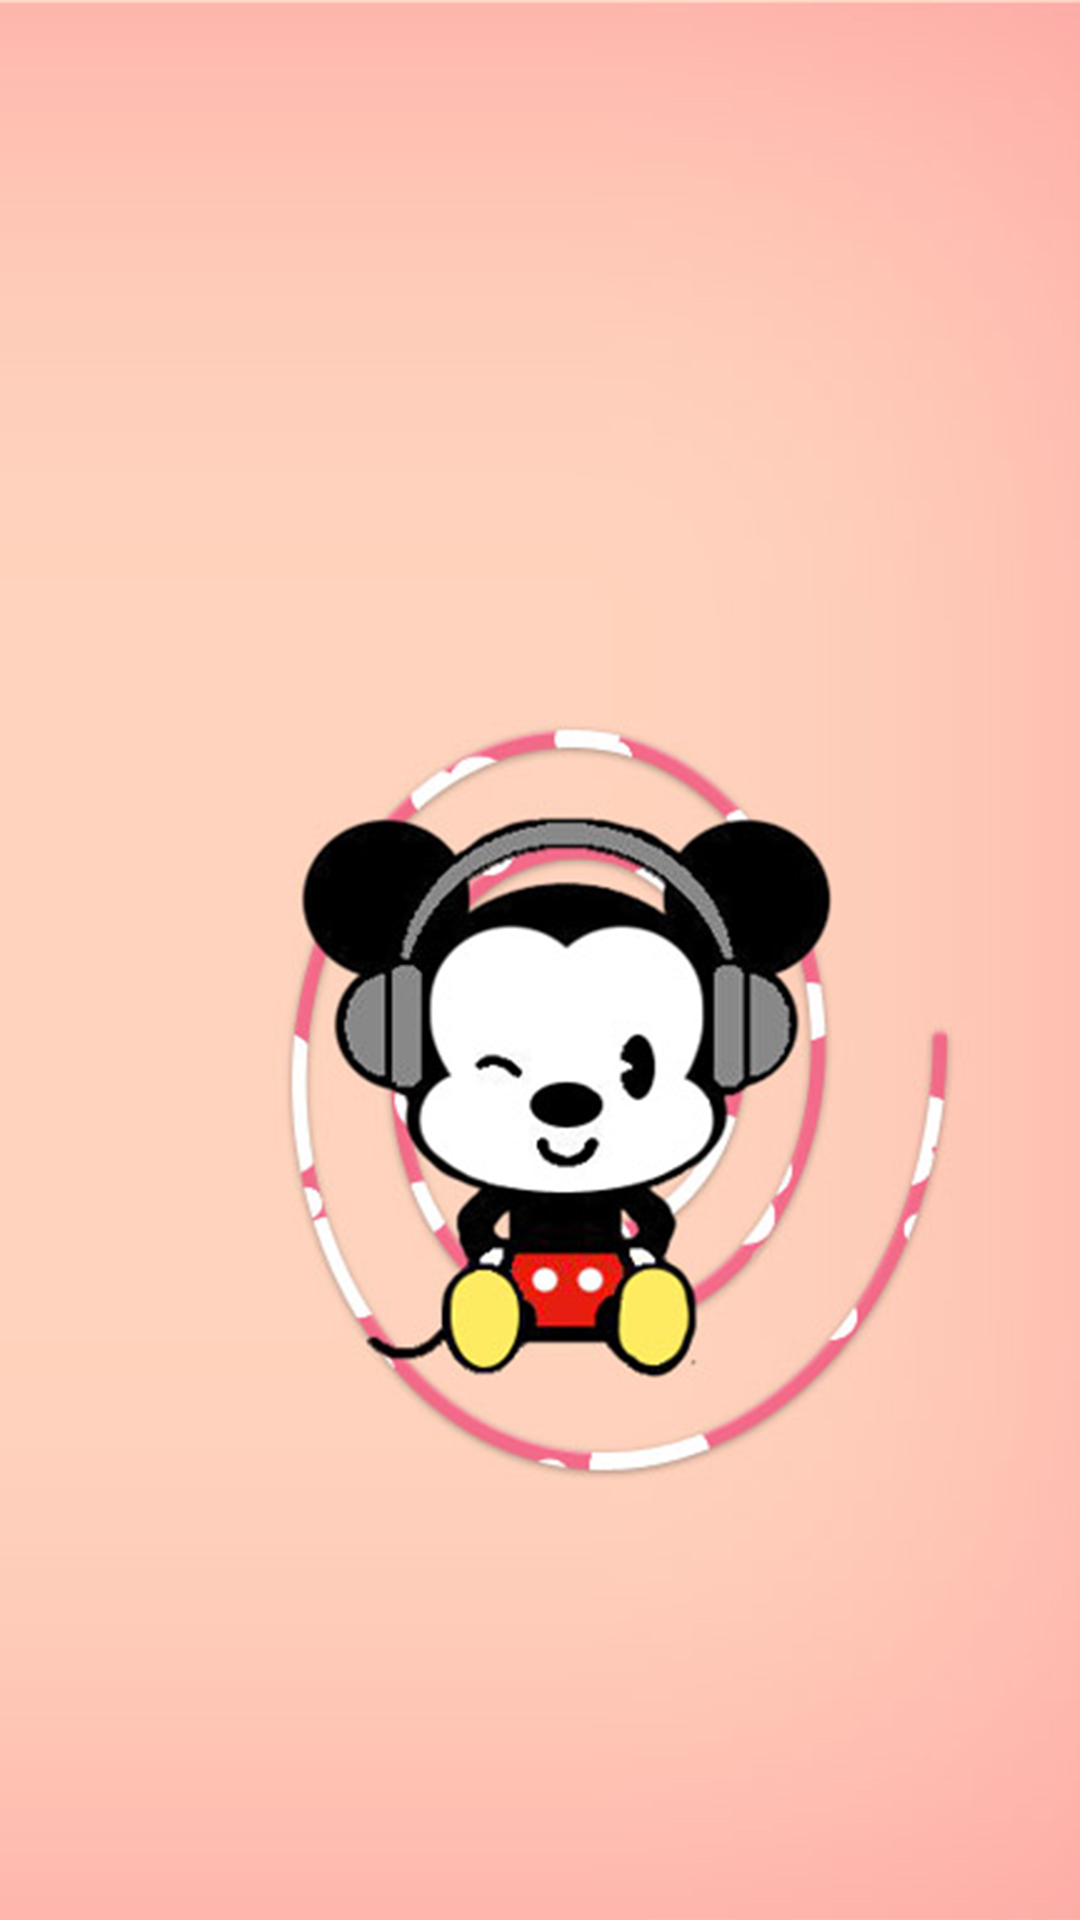 Mickey Mouse Wallpapers For Iphone Iphone13 スマホ壁紙 待受画像ギャラリー